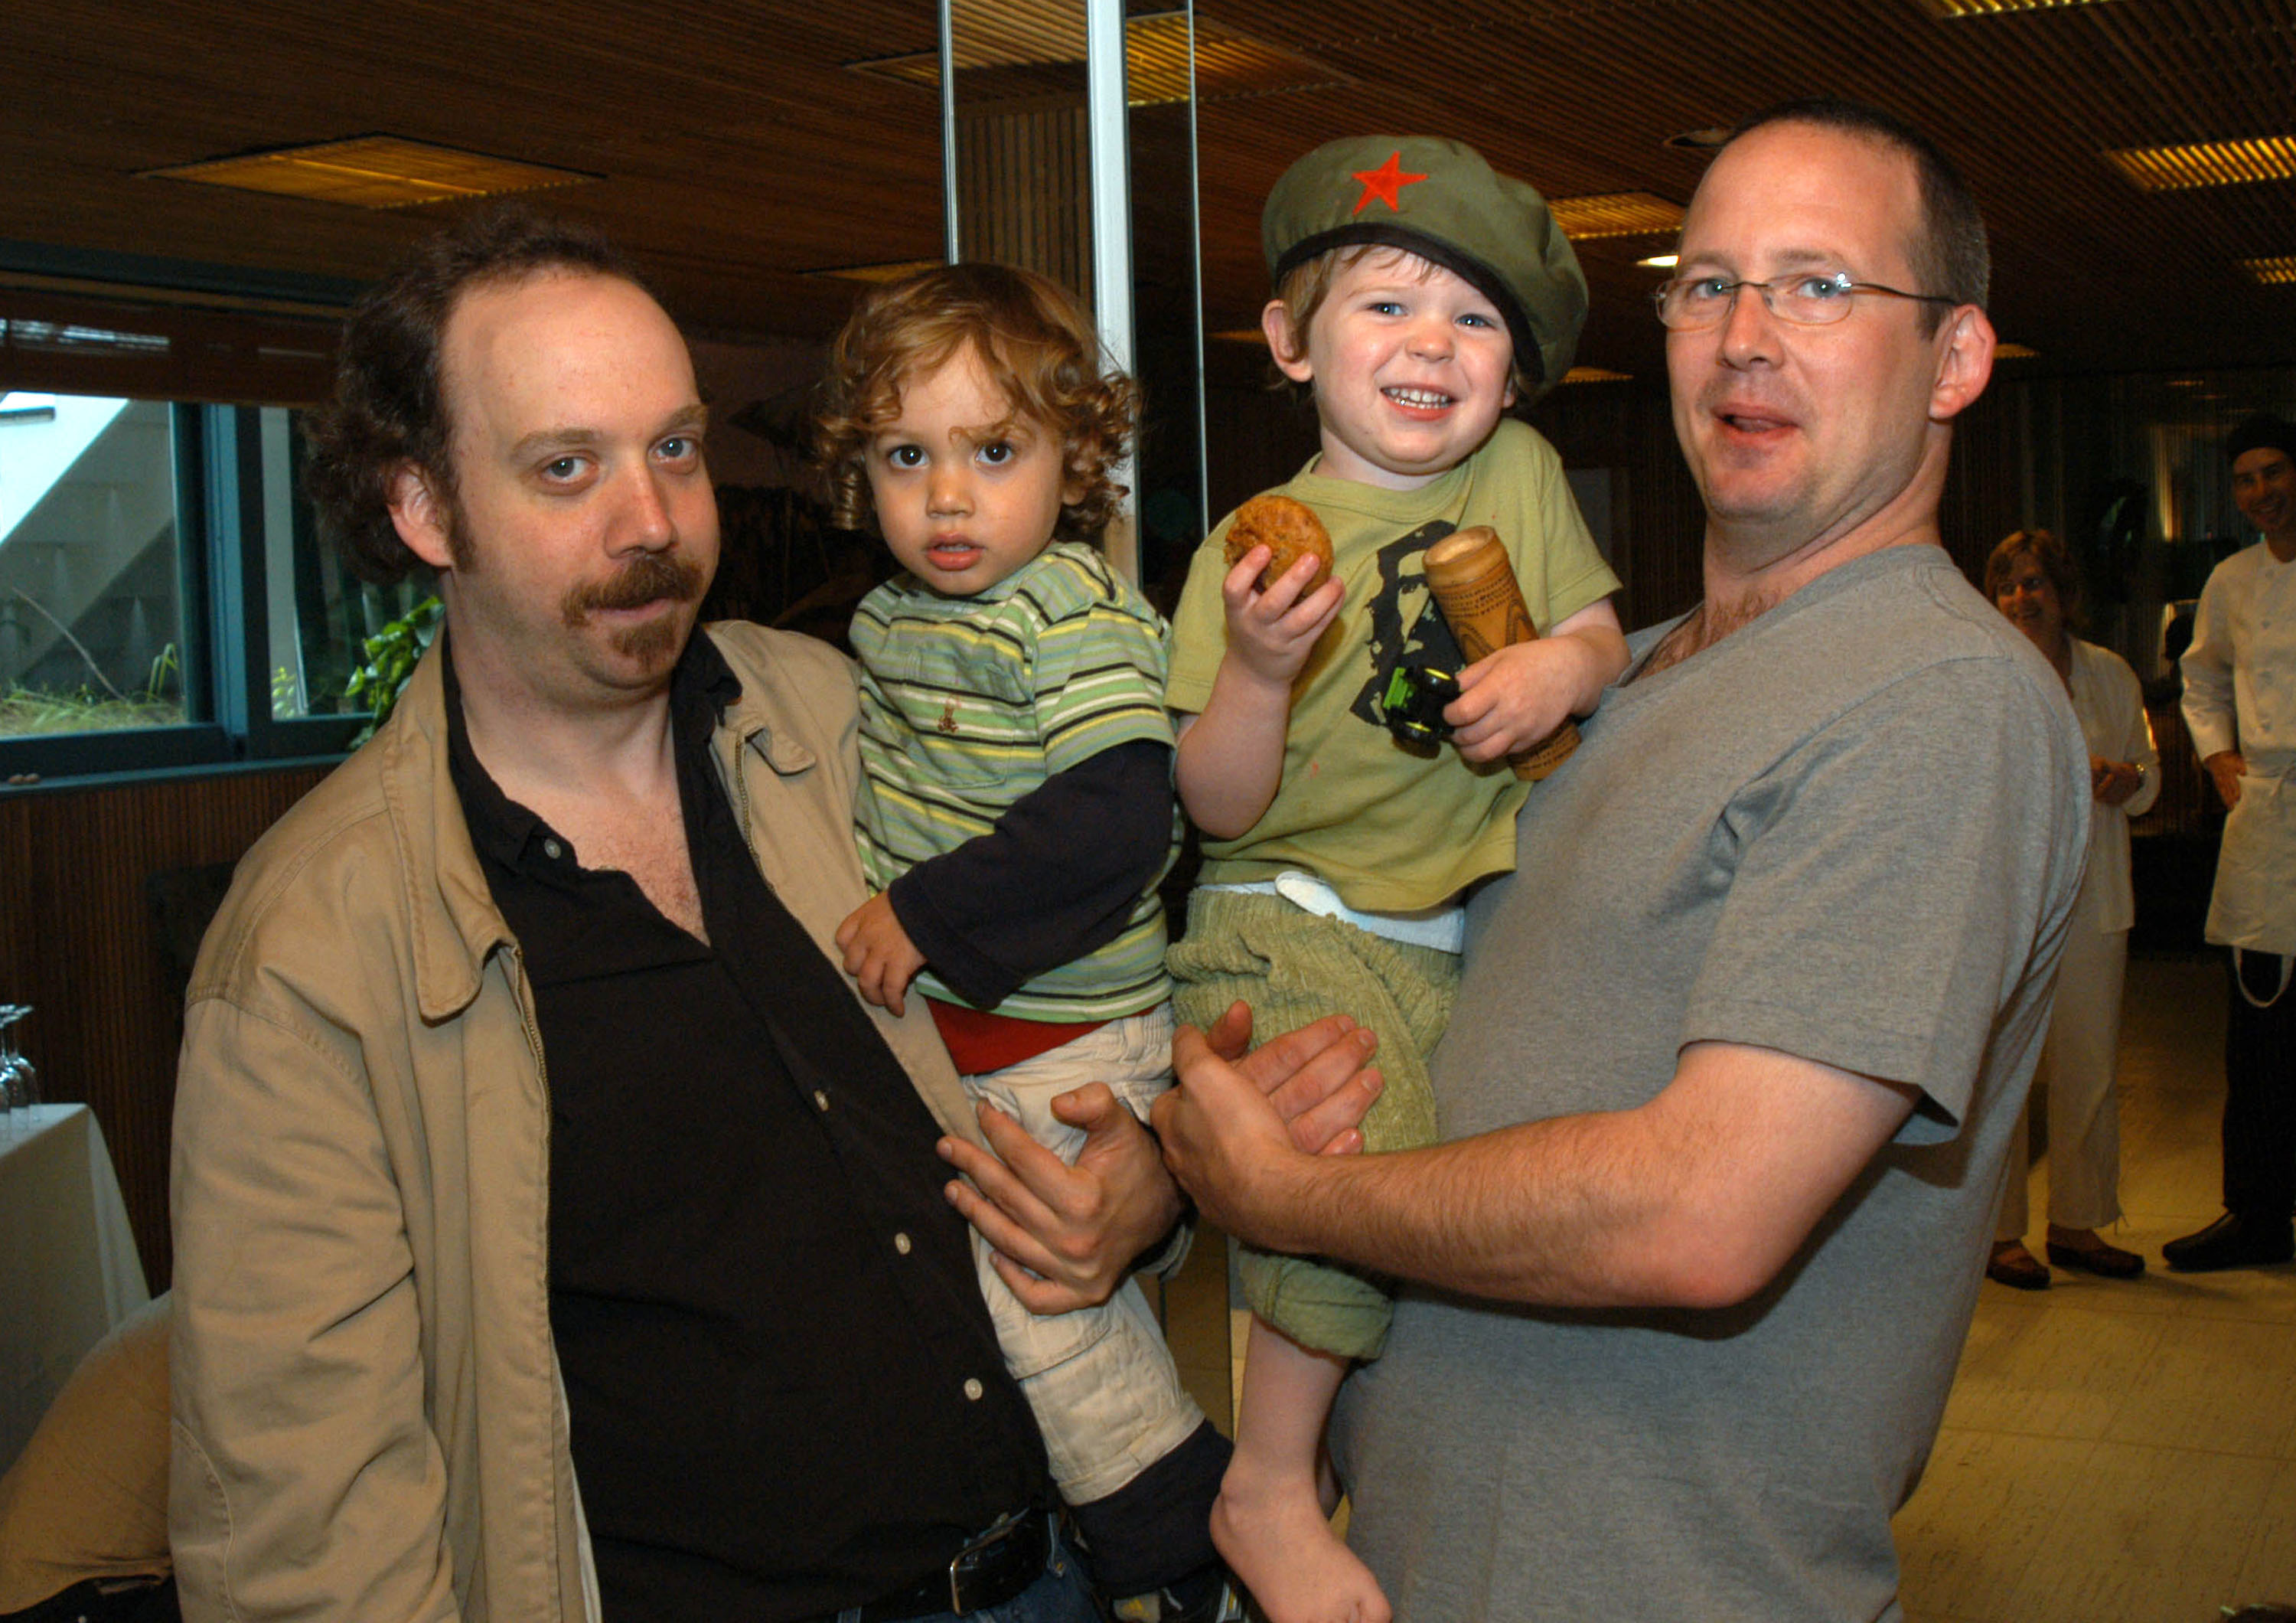 Paul Giamatti with his son Samuel Paul Giamatti and Ted Hope with his child Michael Hope attend the Nantucket Film Festival 8 - Farewell Brunch at The Johnson Estate in 2003 in Nantucket, Massachusetts.  | Source: Getty Images